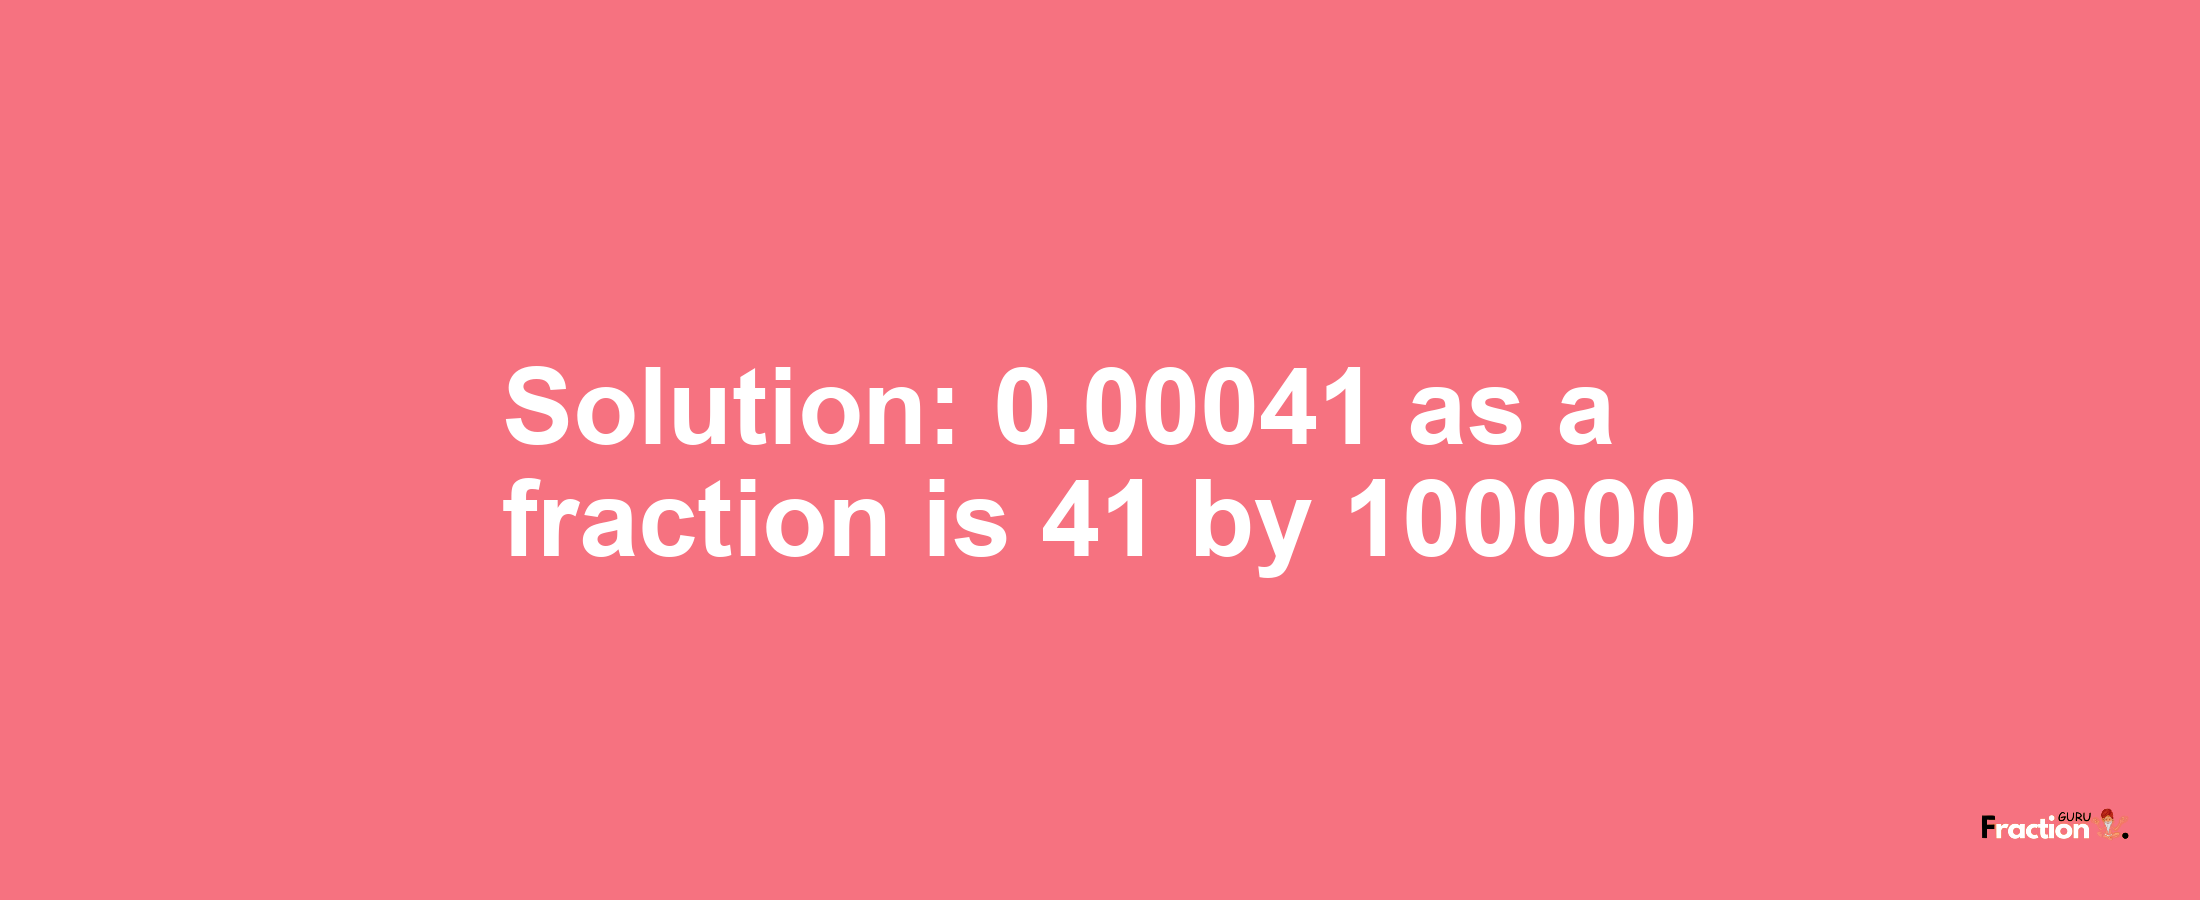 Solution:0.00041 as a fraction is 41/100000